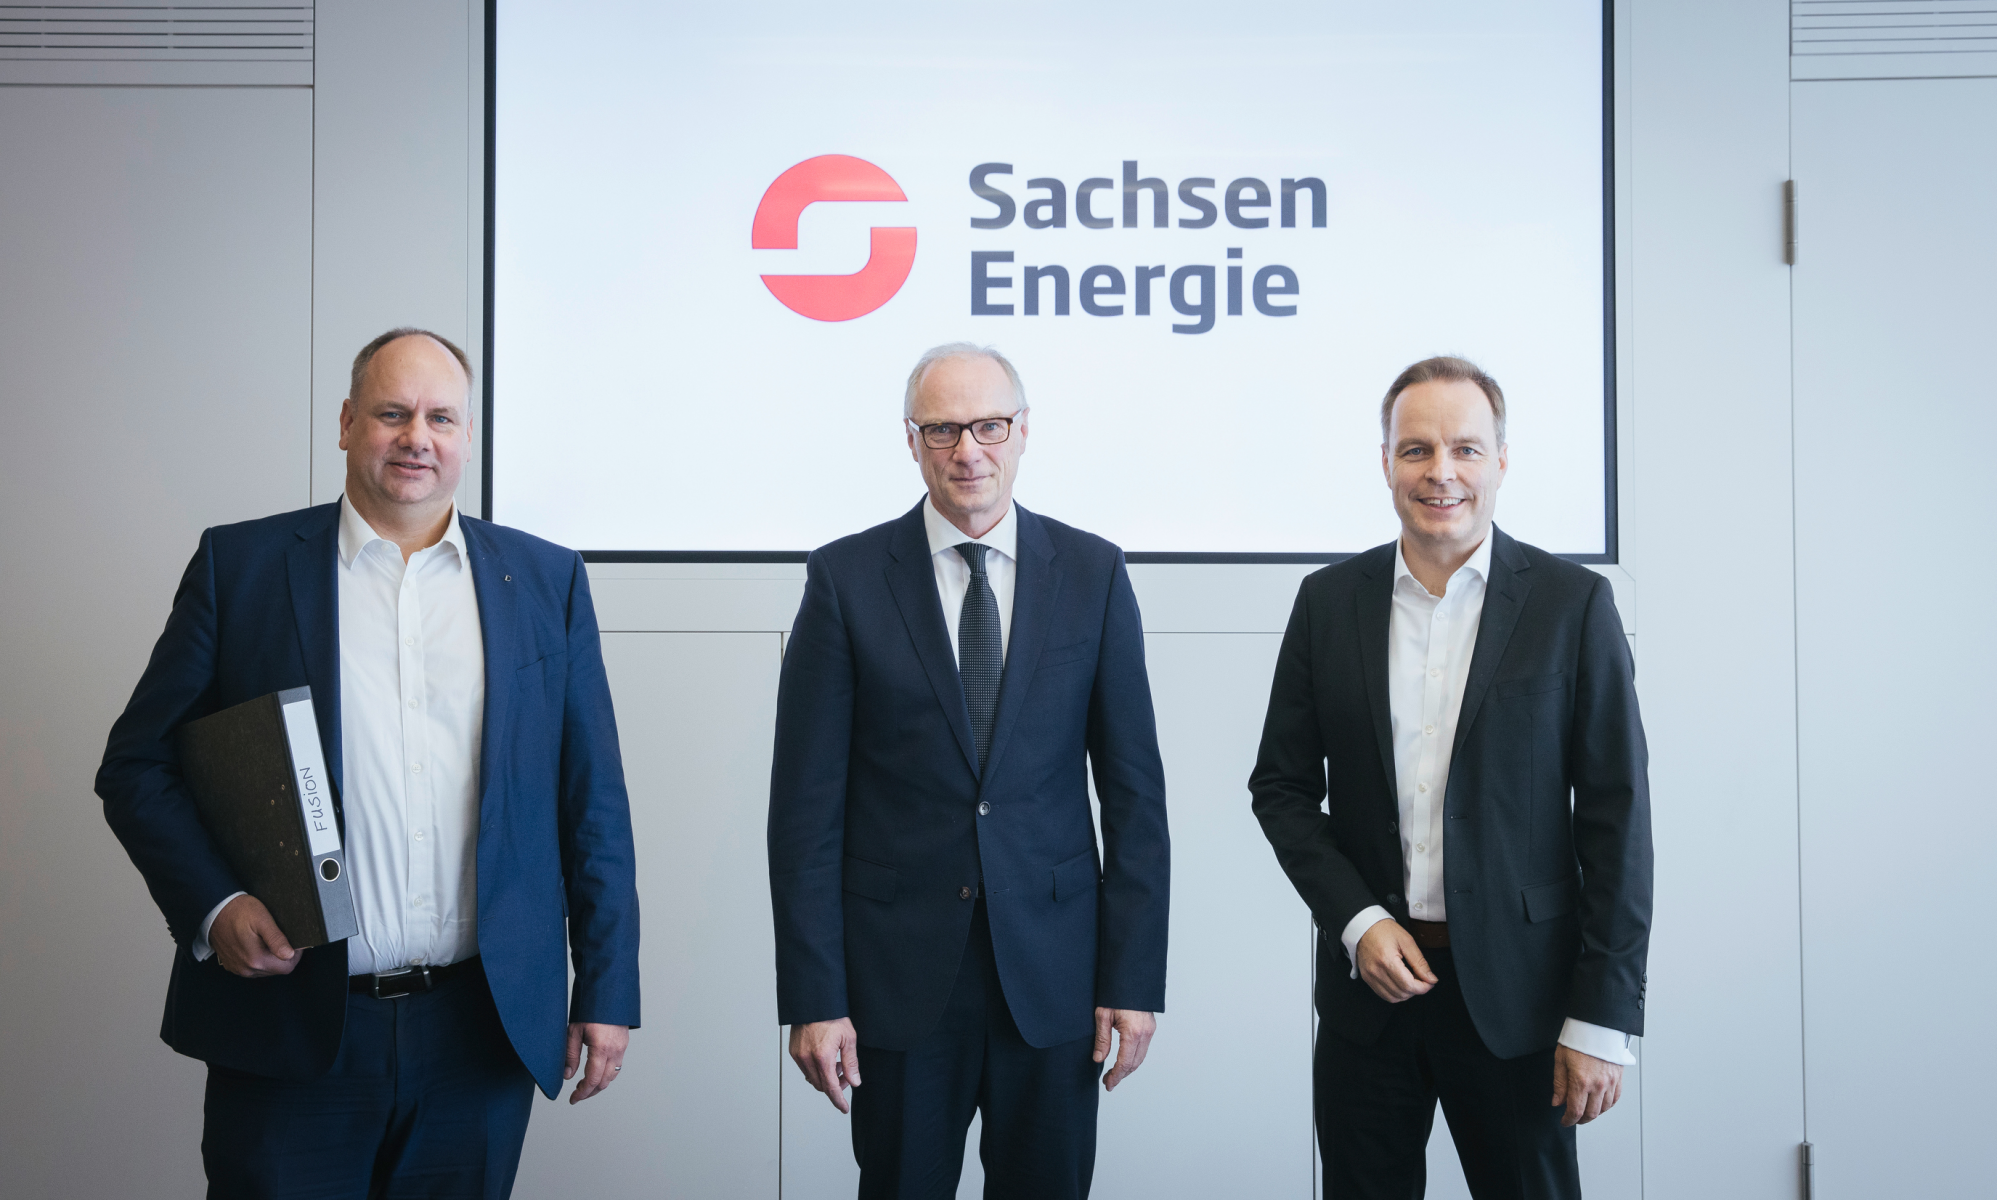 EnergieFusion in Sachsen